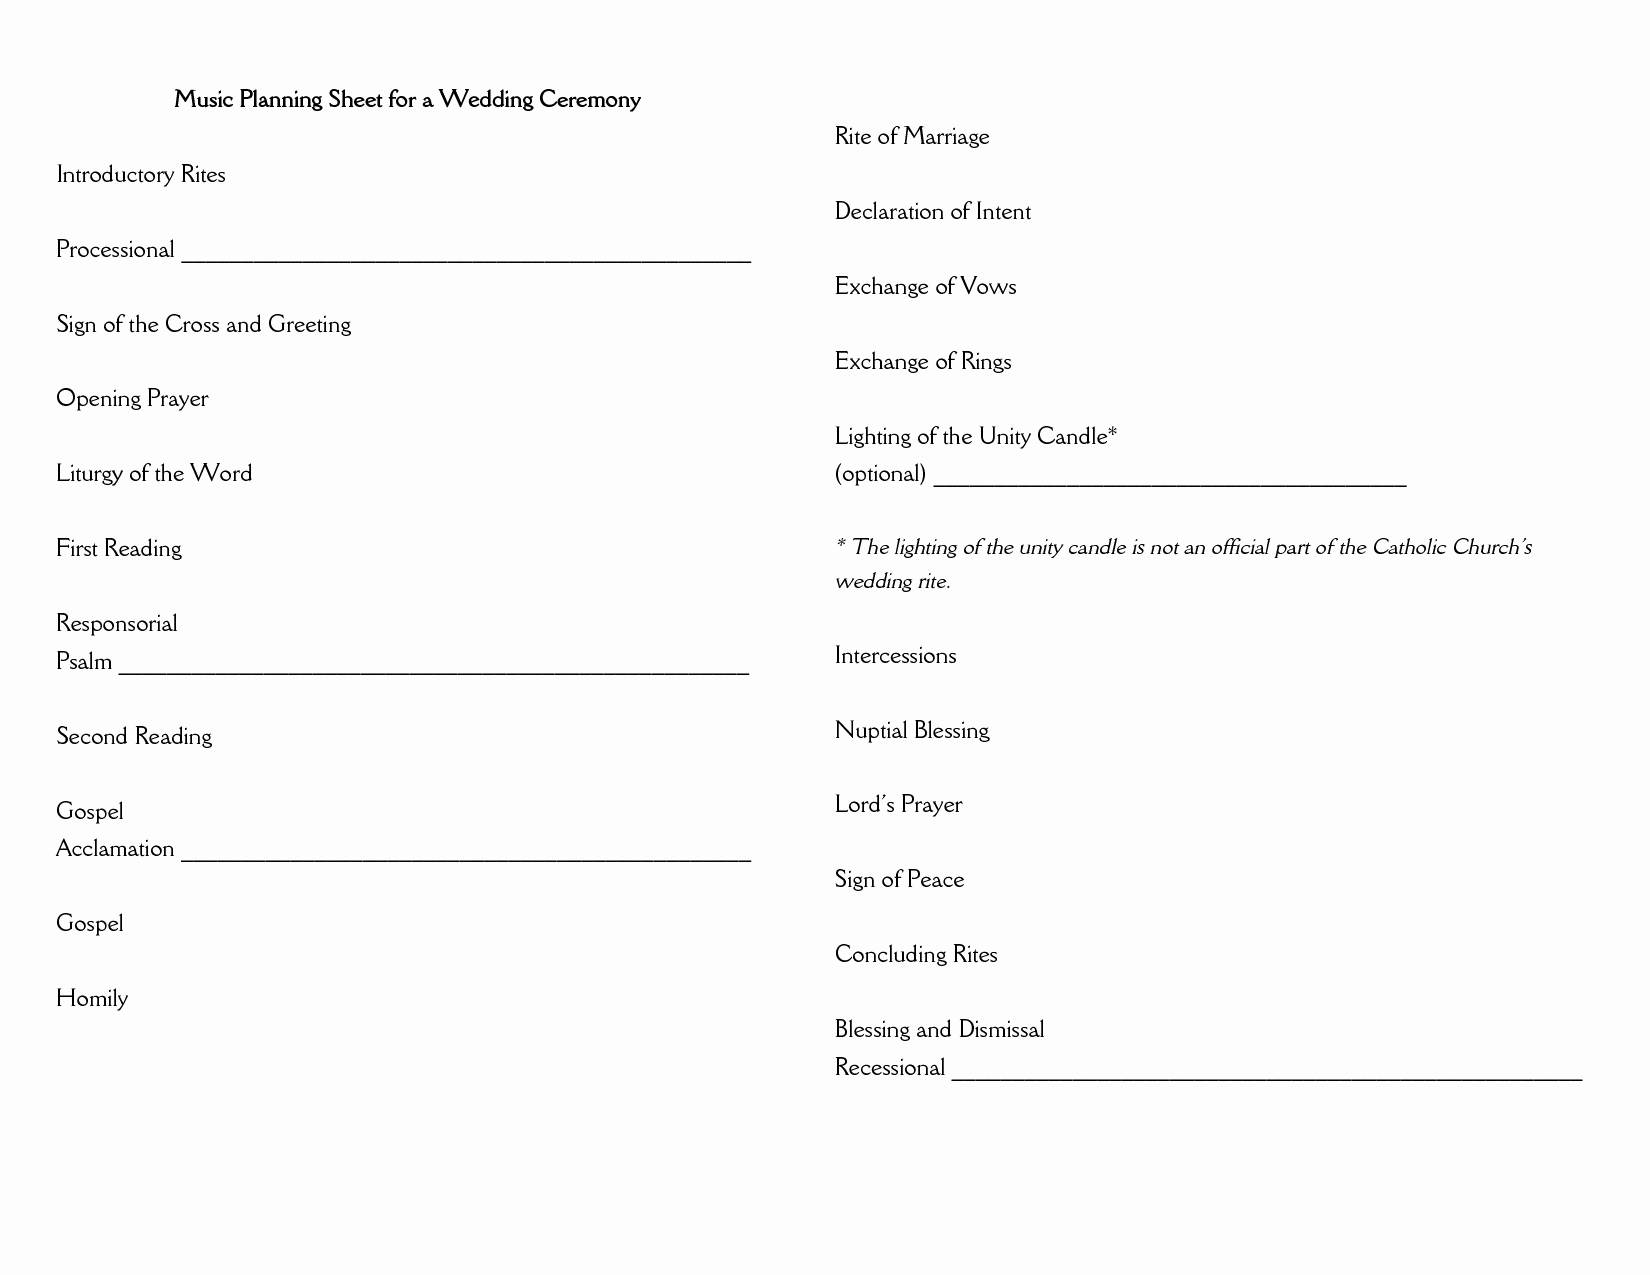 Wedding Ceremony song List Template Beautiful 27 Of Wedding Music Planner Template